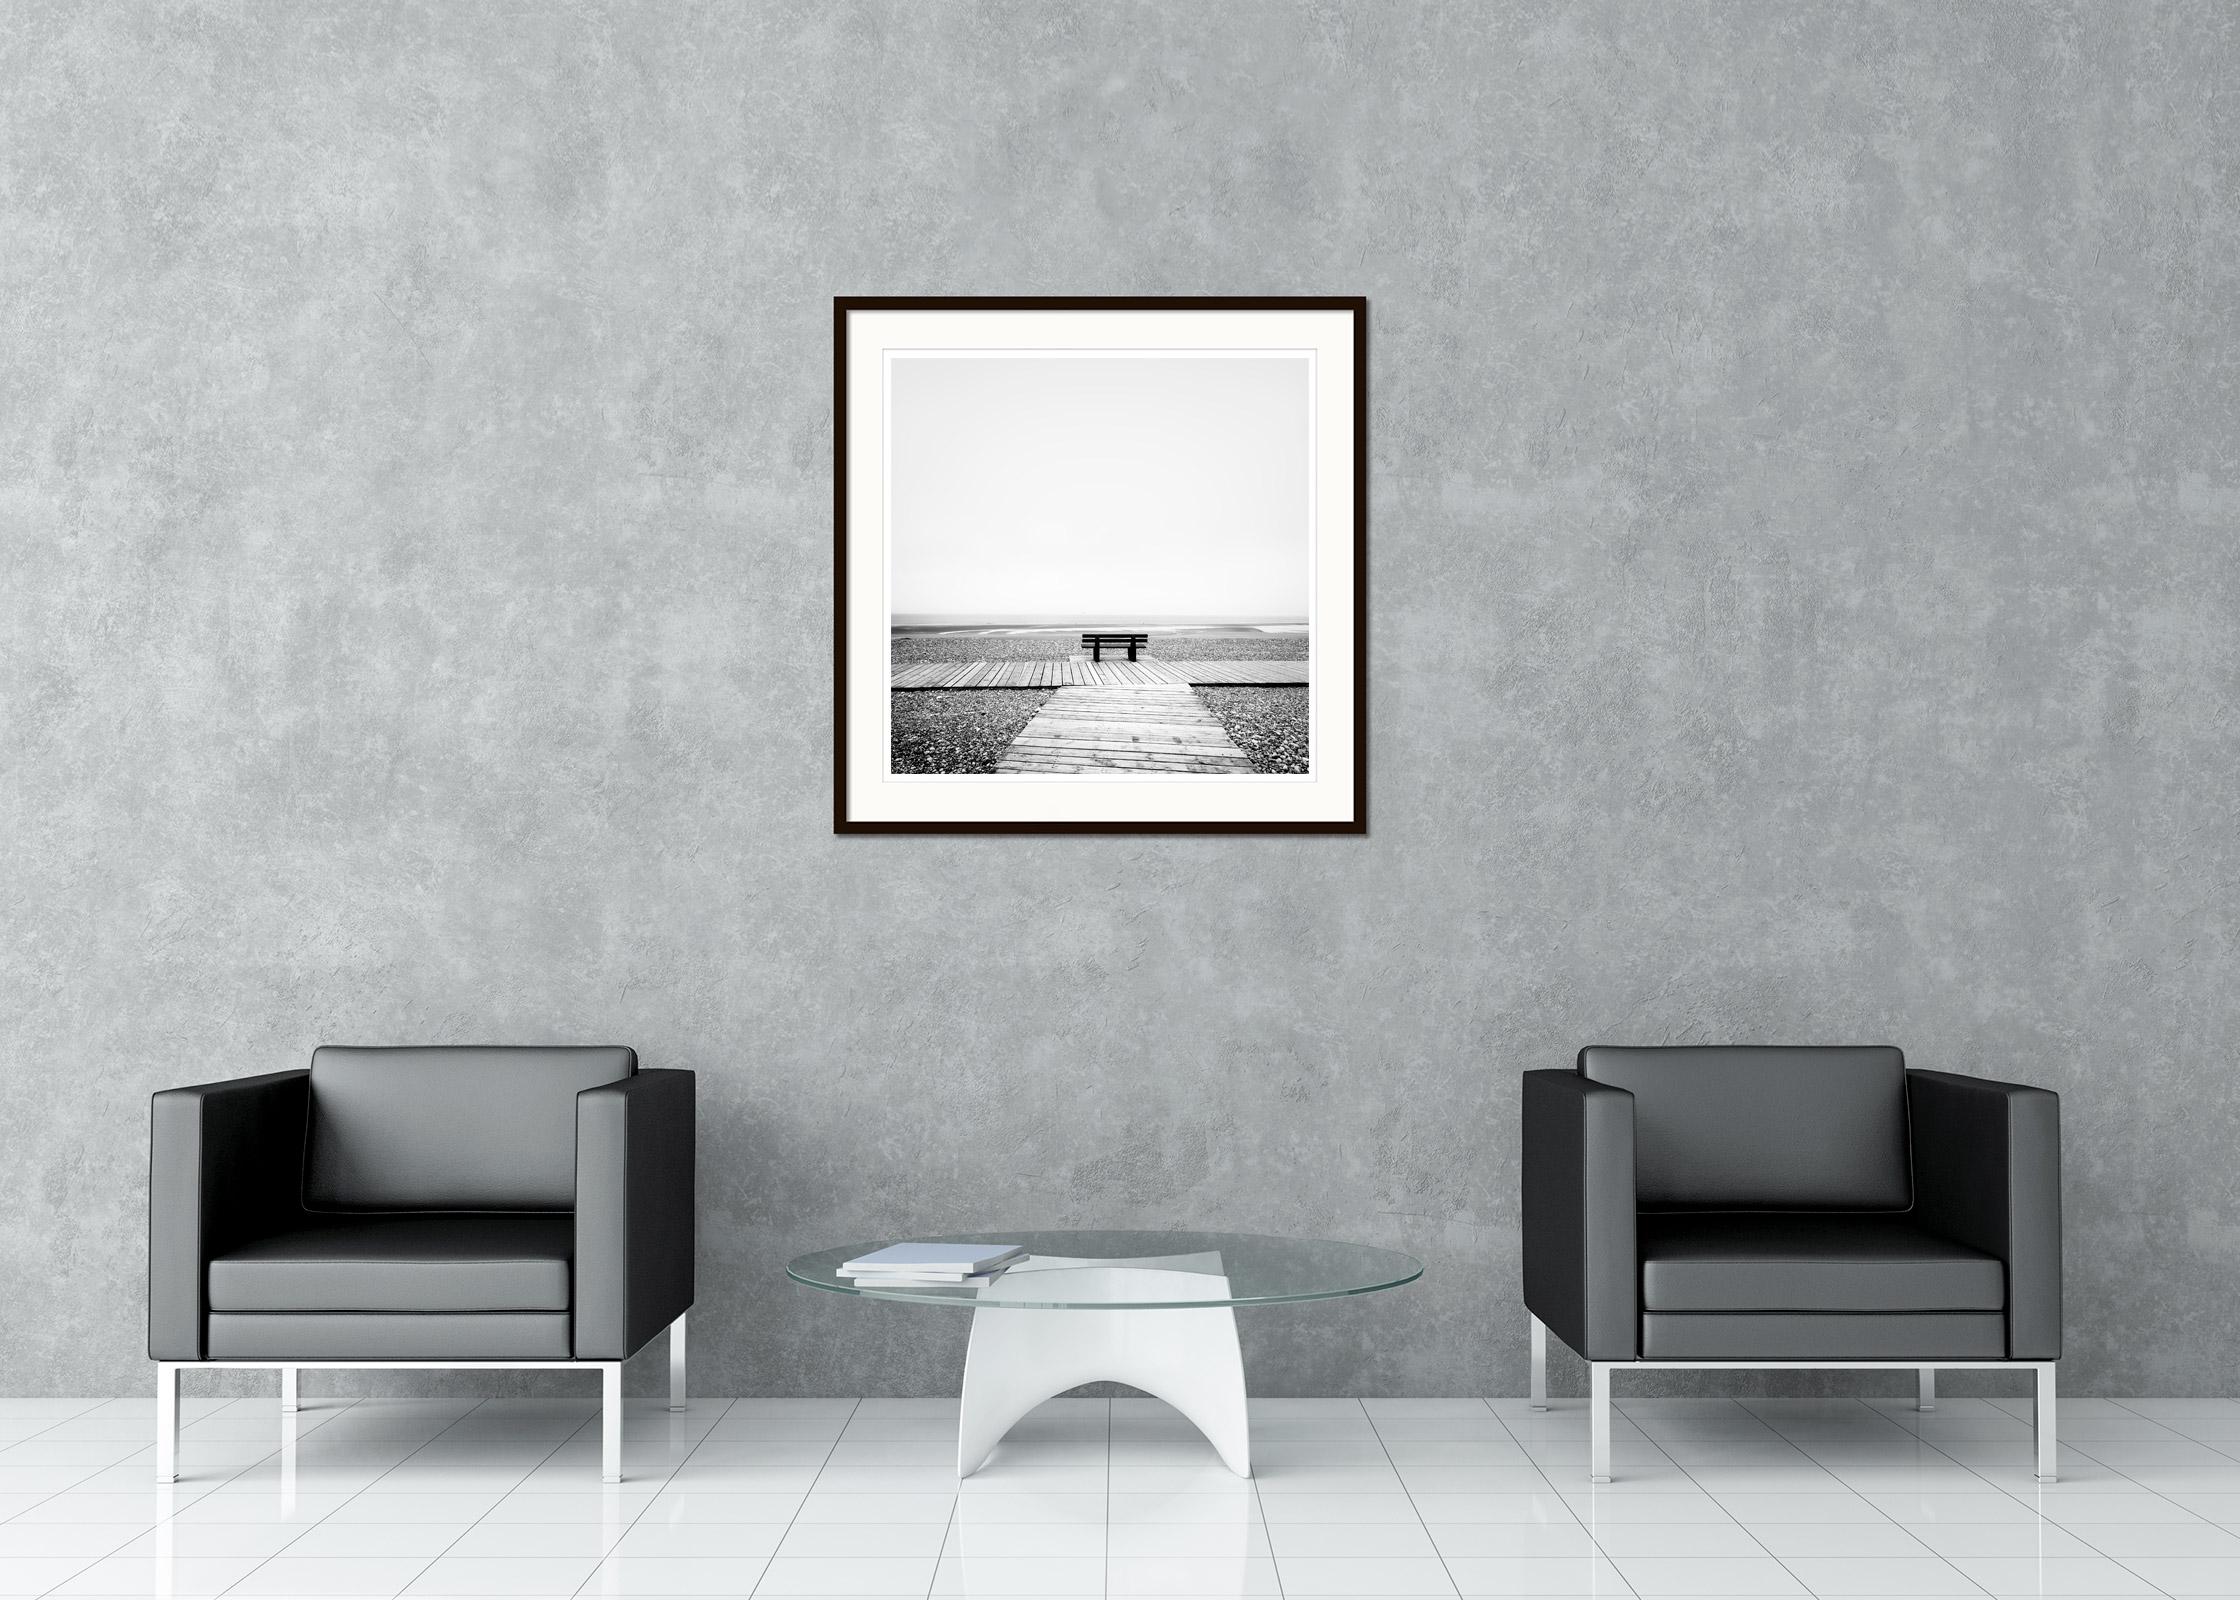 Black and White Fine Art landscape photography. Lonely bench on the deserted stone beach in northern France. Archival pigment ink print, edition of 7. Signed, titled, dated and numbered by artist. Certificate of authenticity included. Printed with